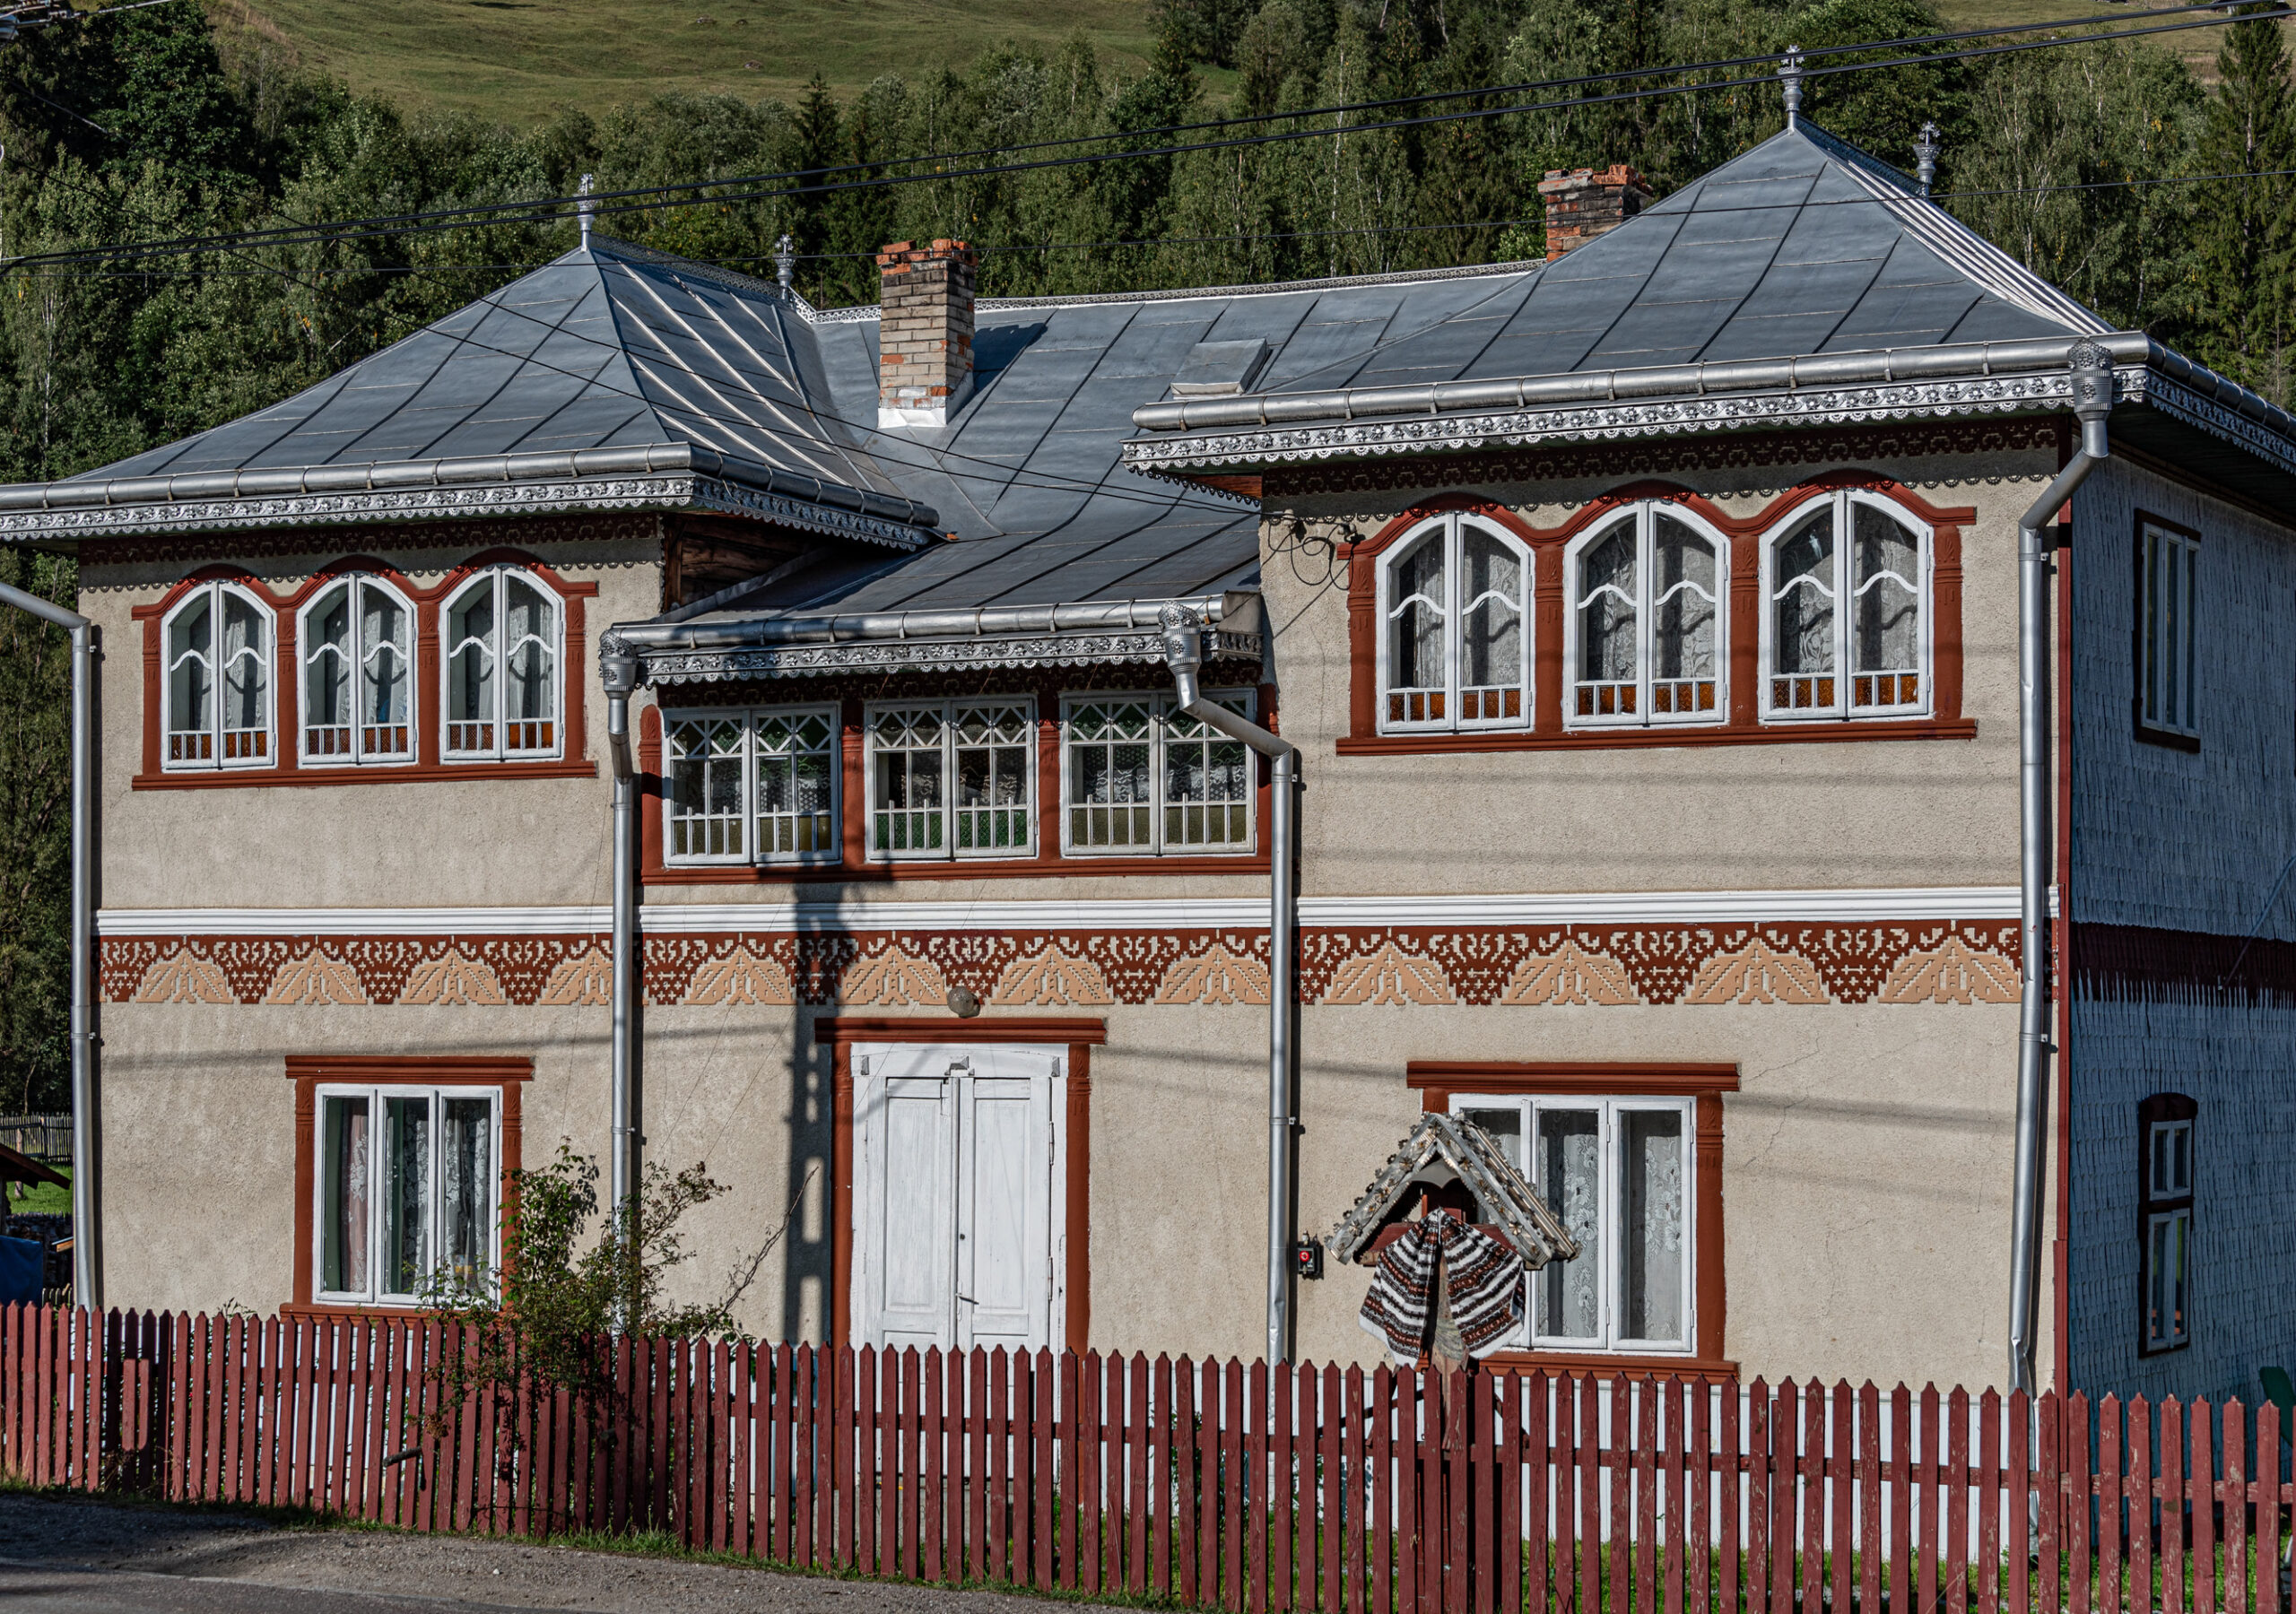 Doors and windows of houses exhibit a painted or applied trim in Bucovina